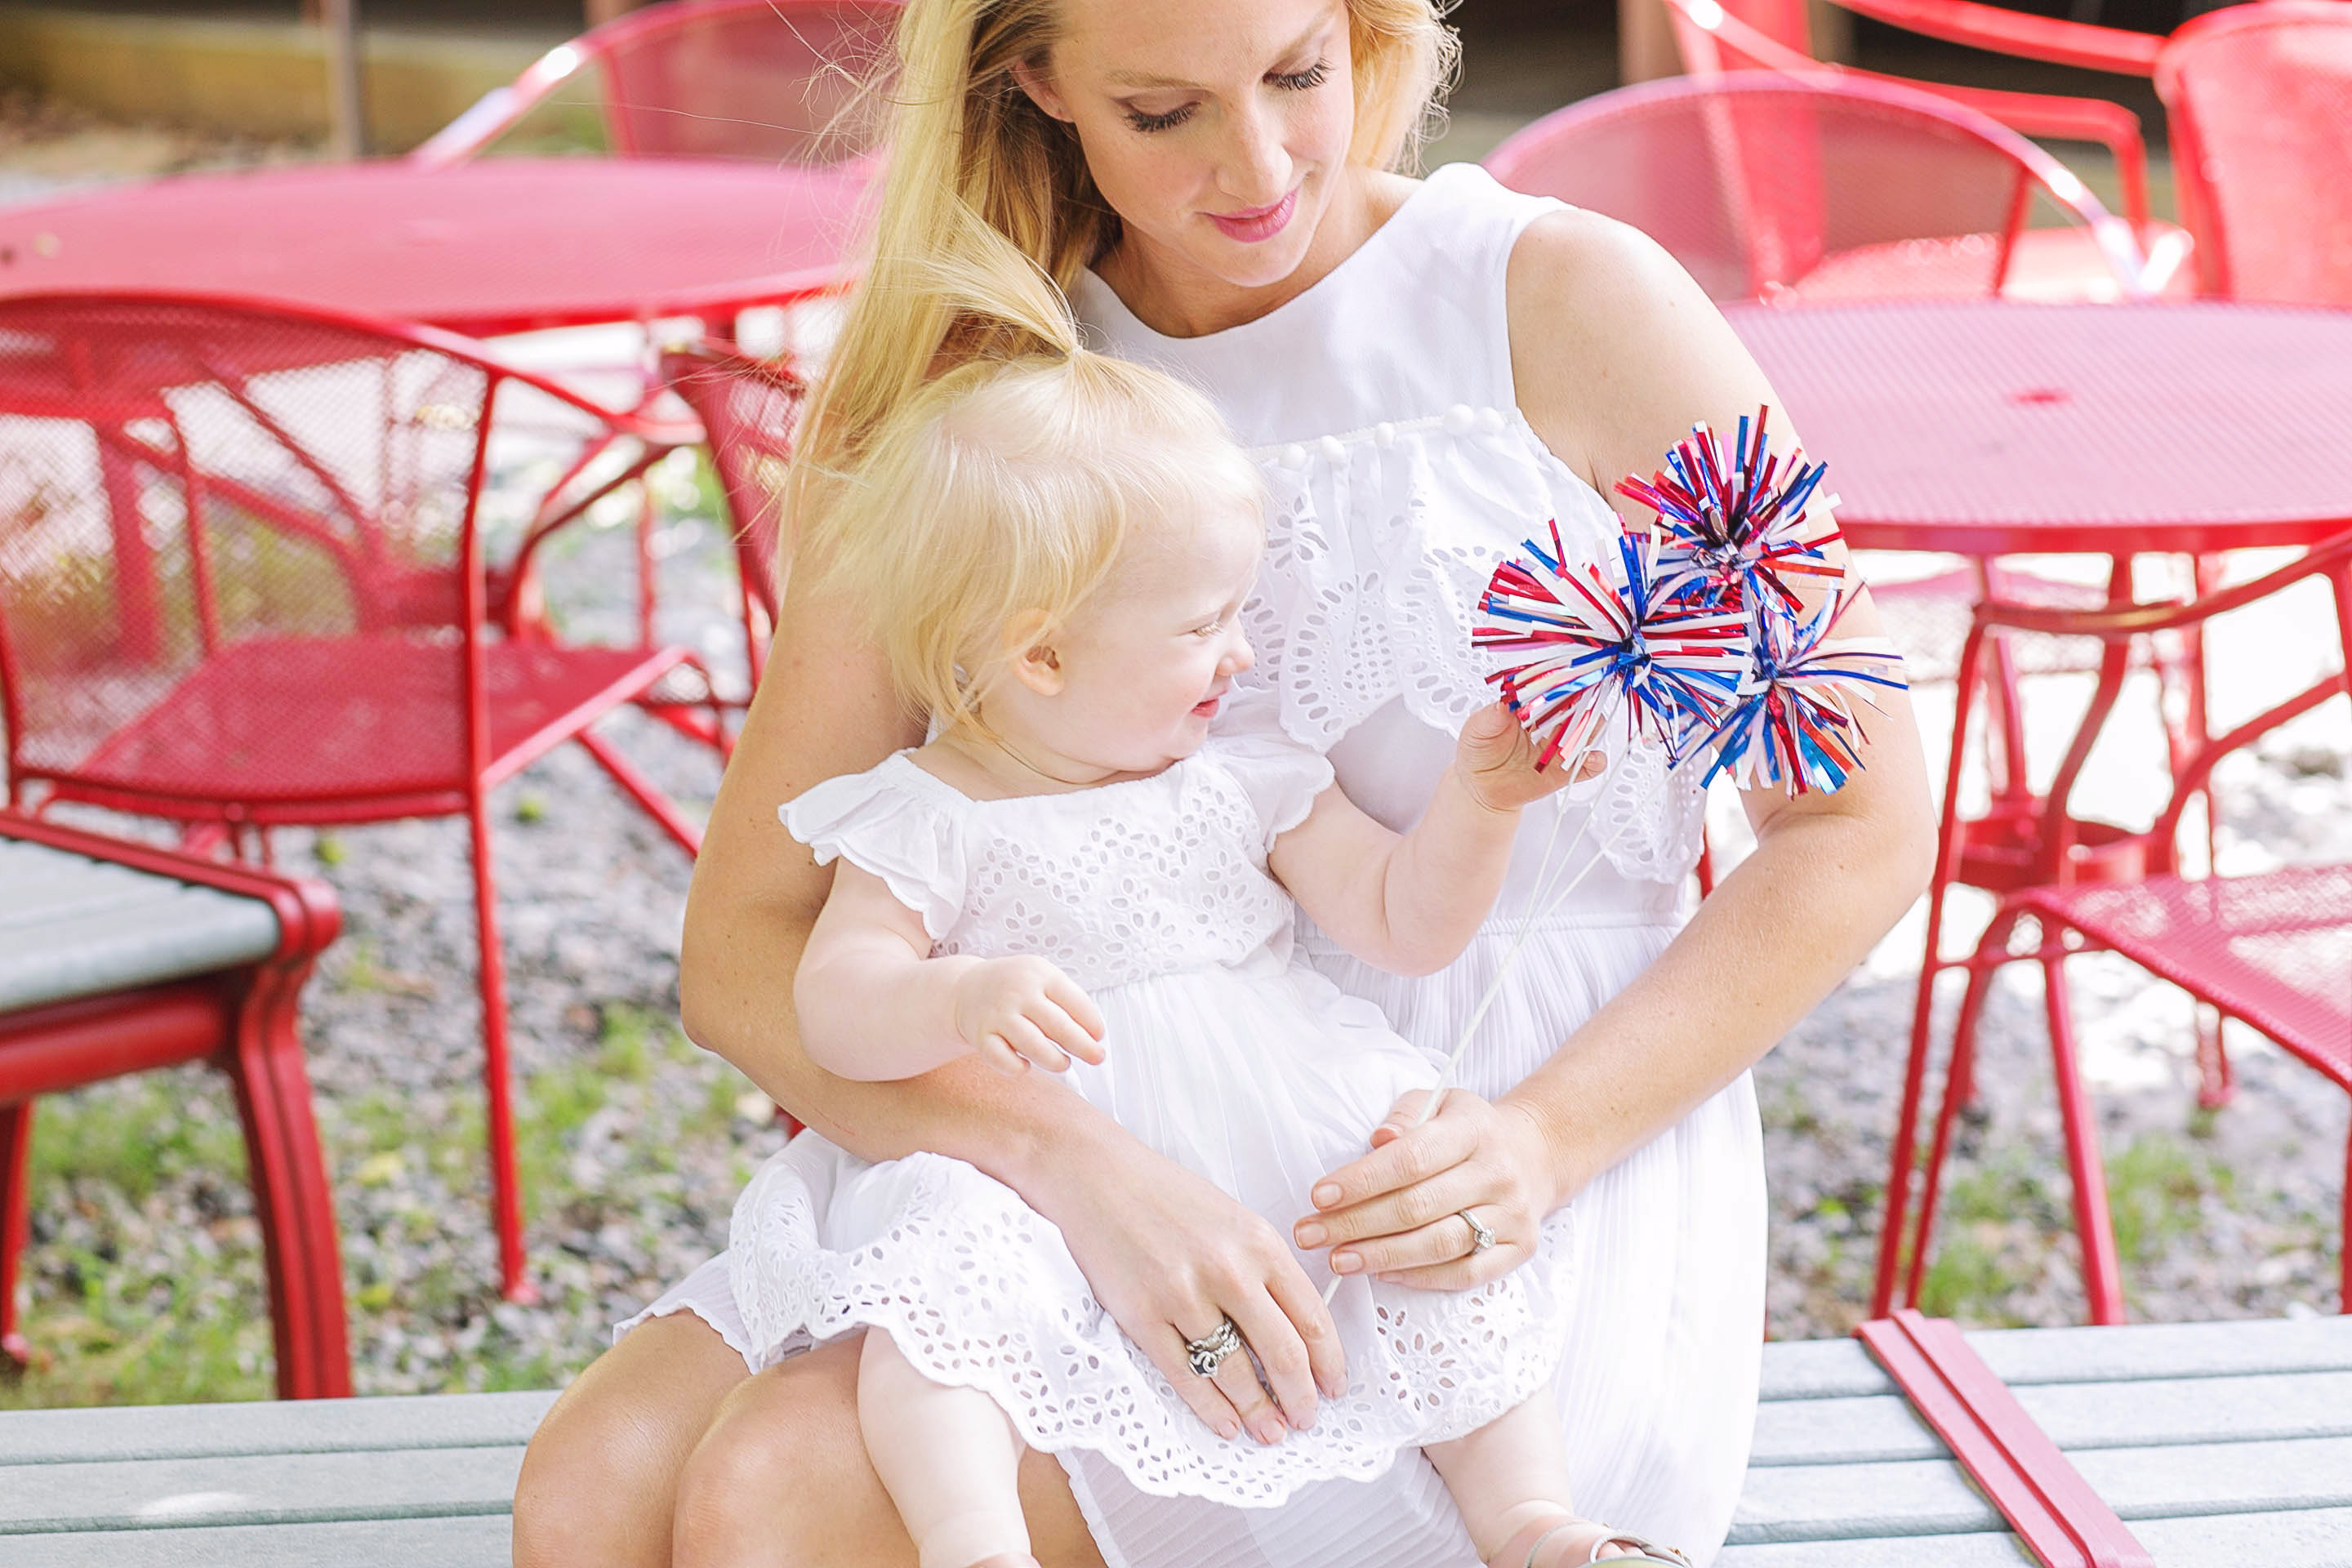 A Day in the Life of a Mommy Blogger by popular blogger Jessica of Happily Hughes